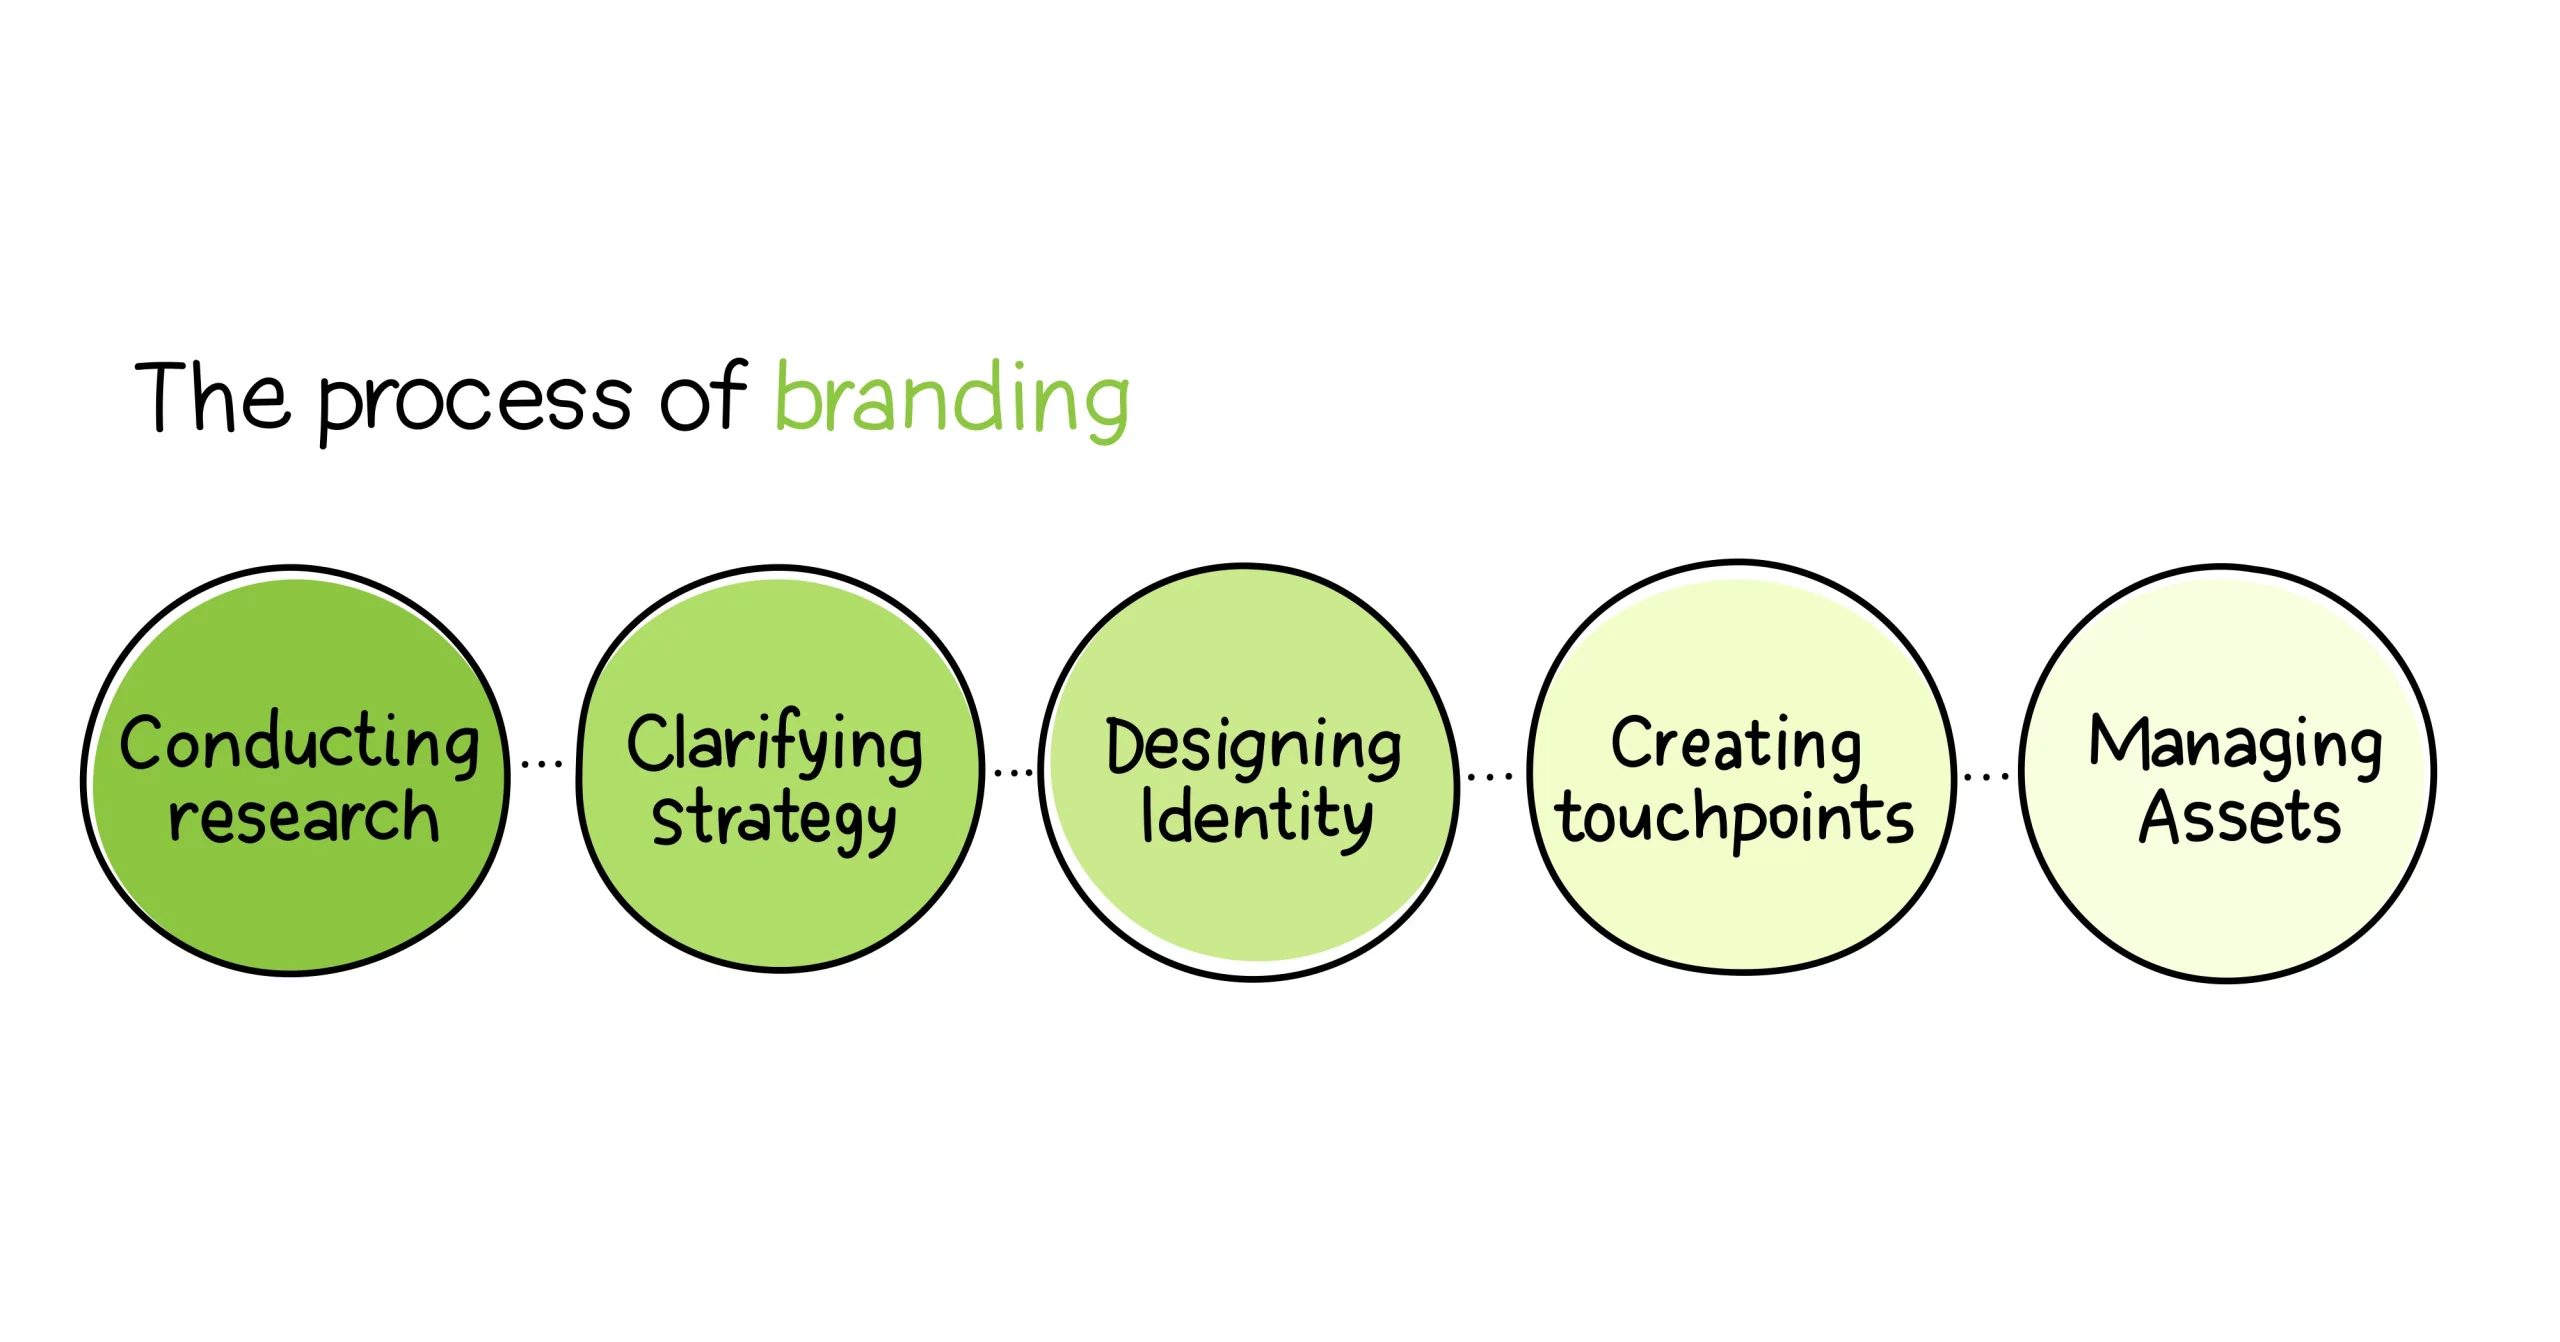 The process of branding includes conducting research, clarifying strategy, designing identity, creating touchpoints, and managing assets.